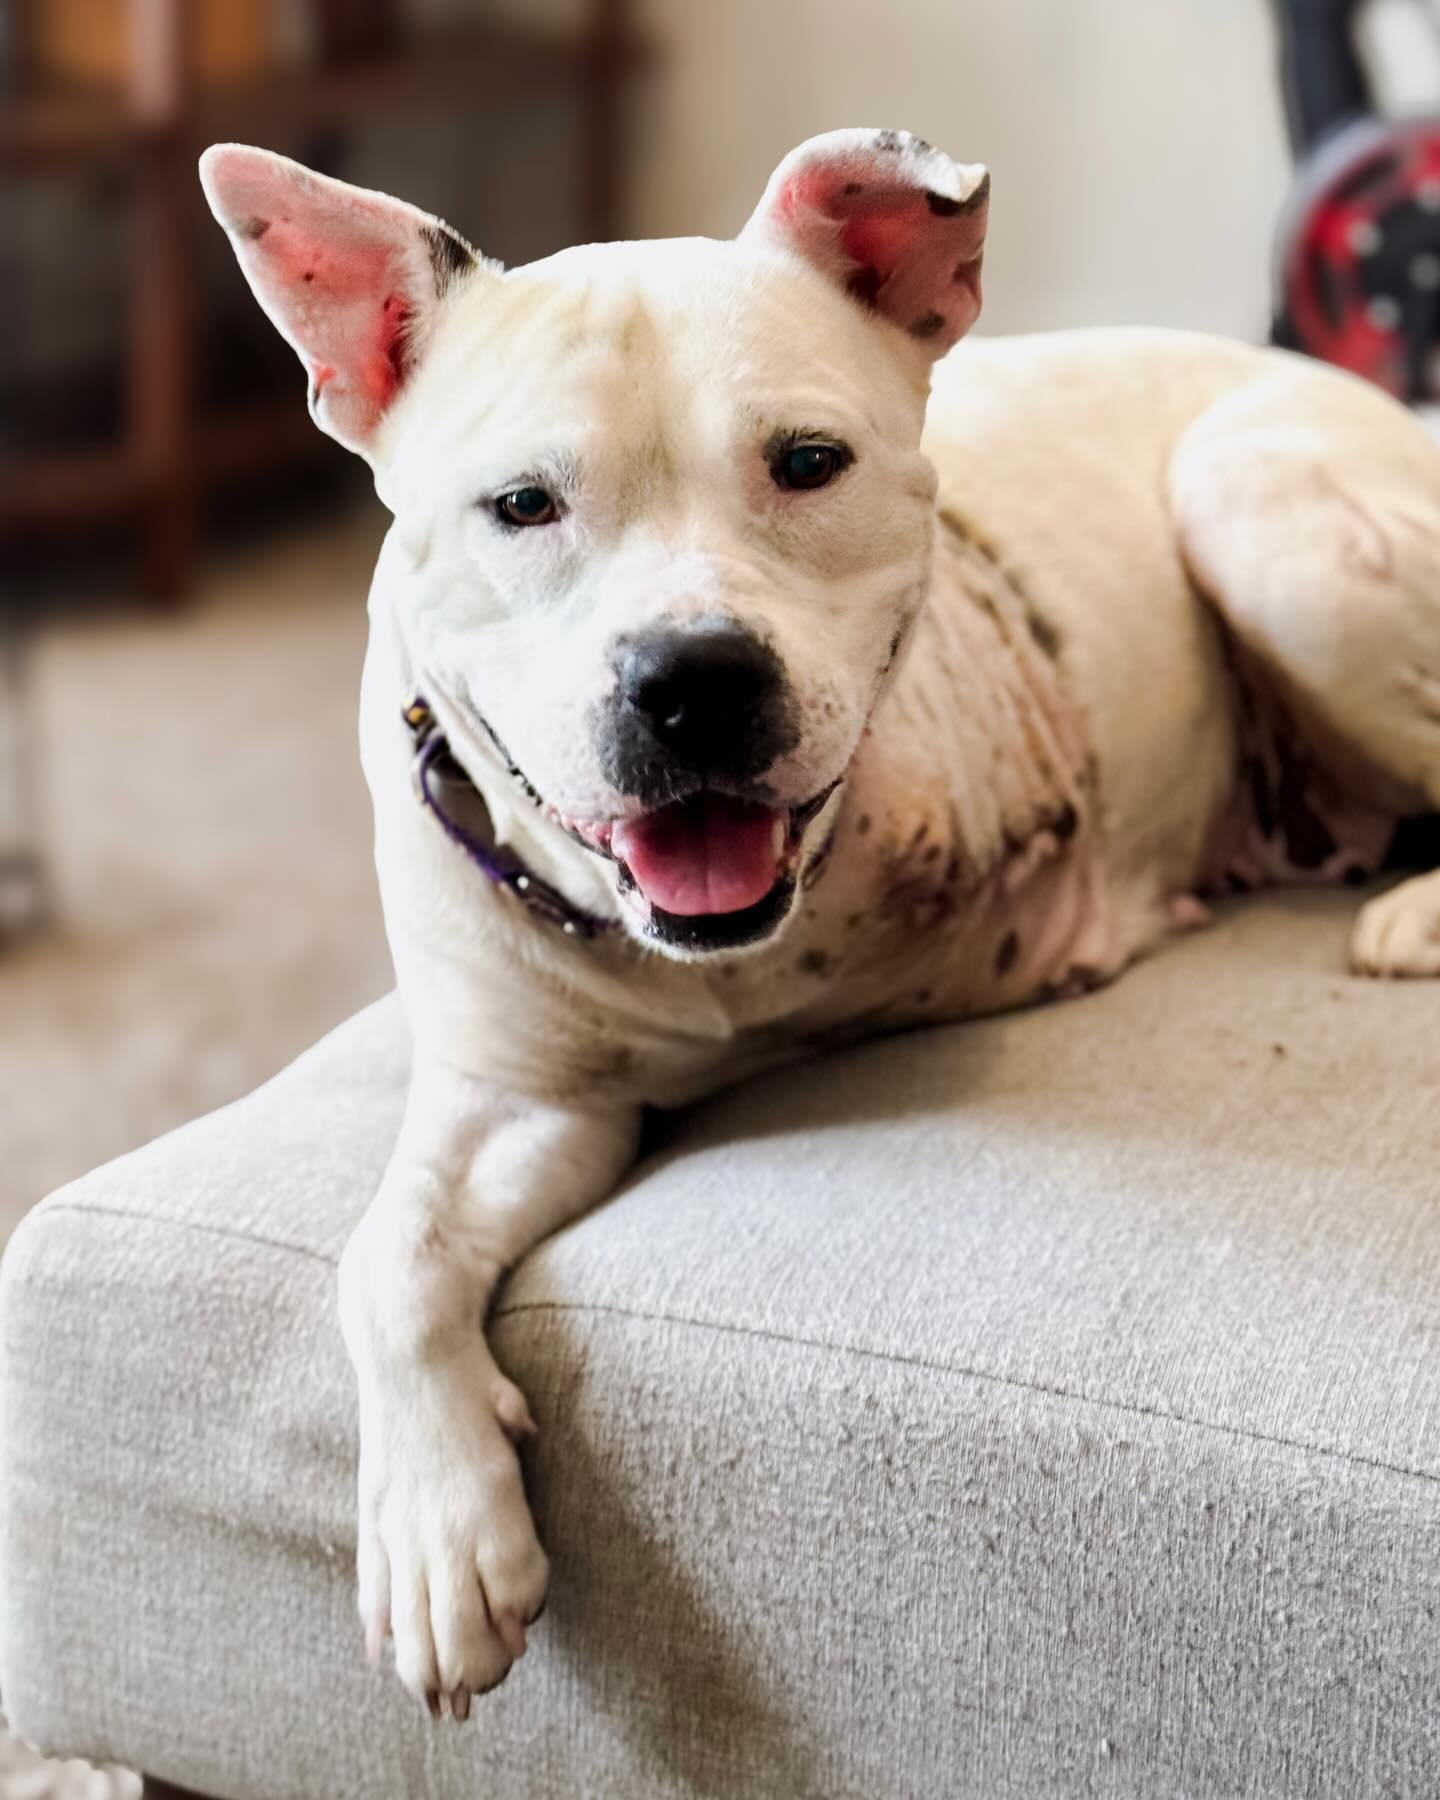 NELLY JELLY BELLY UPDATE 😋

Nell (originally Snowball at RCPCAS) has been stealin&rsquo; hearts across America since she was first posted as in need of rescue by the shelter. Her story tugged at hundreds of heartstrings, and the outpouring of suppor